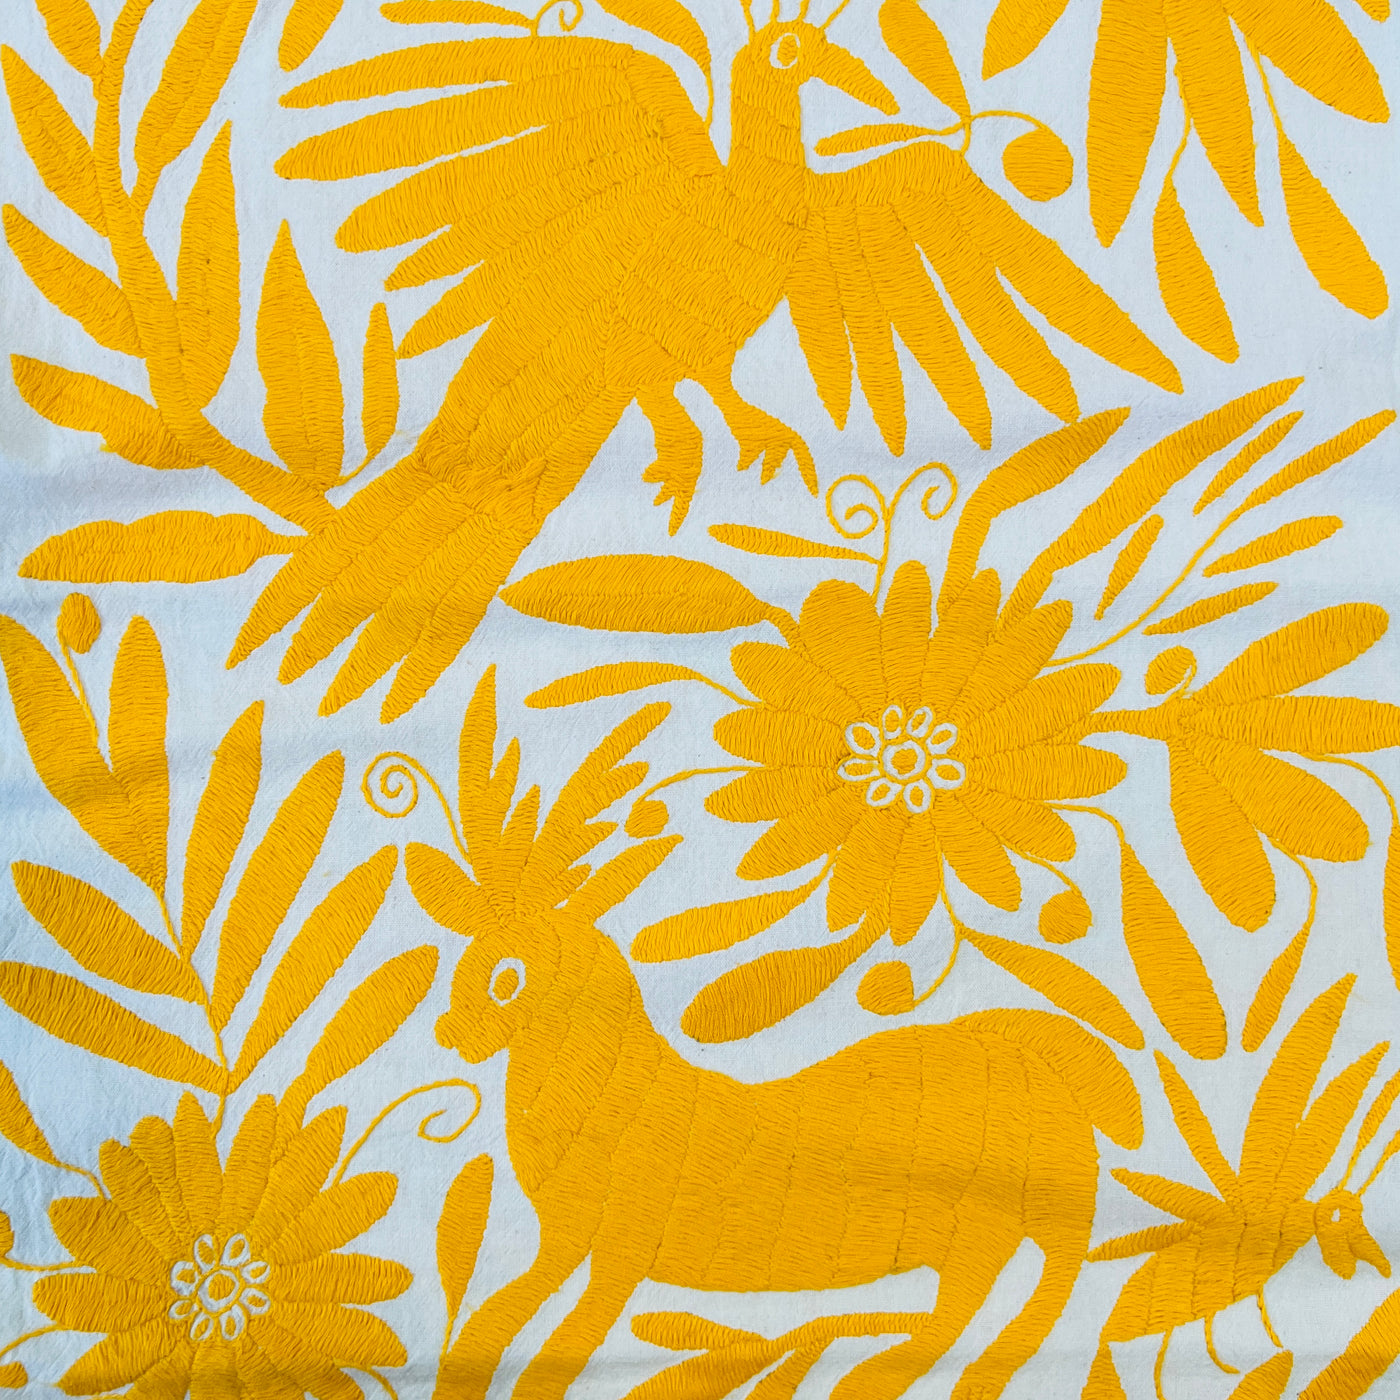 enhanced view of yellow floral and fauna scenery detail embroidered on off white table runner